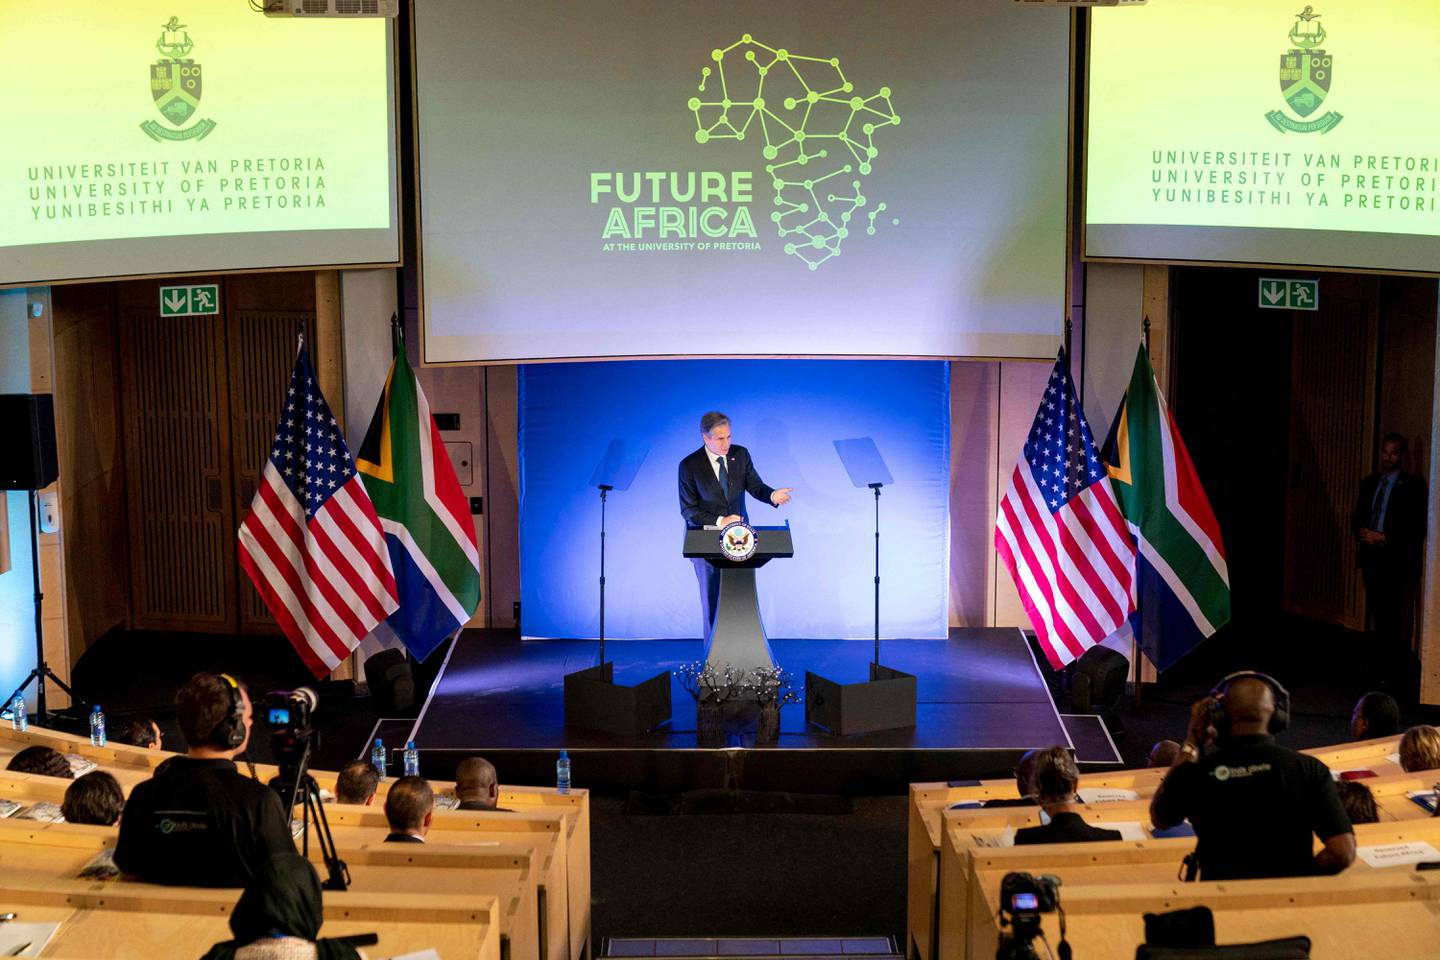 US Secretary of State Antony Blinken delivers a speech on the US-Africa Strategy at the University of Pretoria's Future Africa Campus in Pretoria, on Monday. AFP